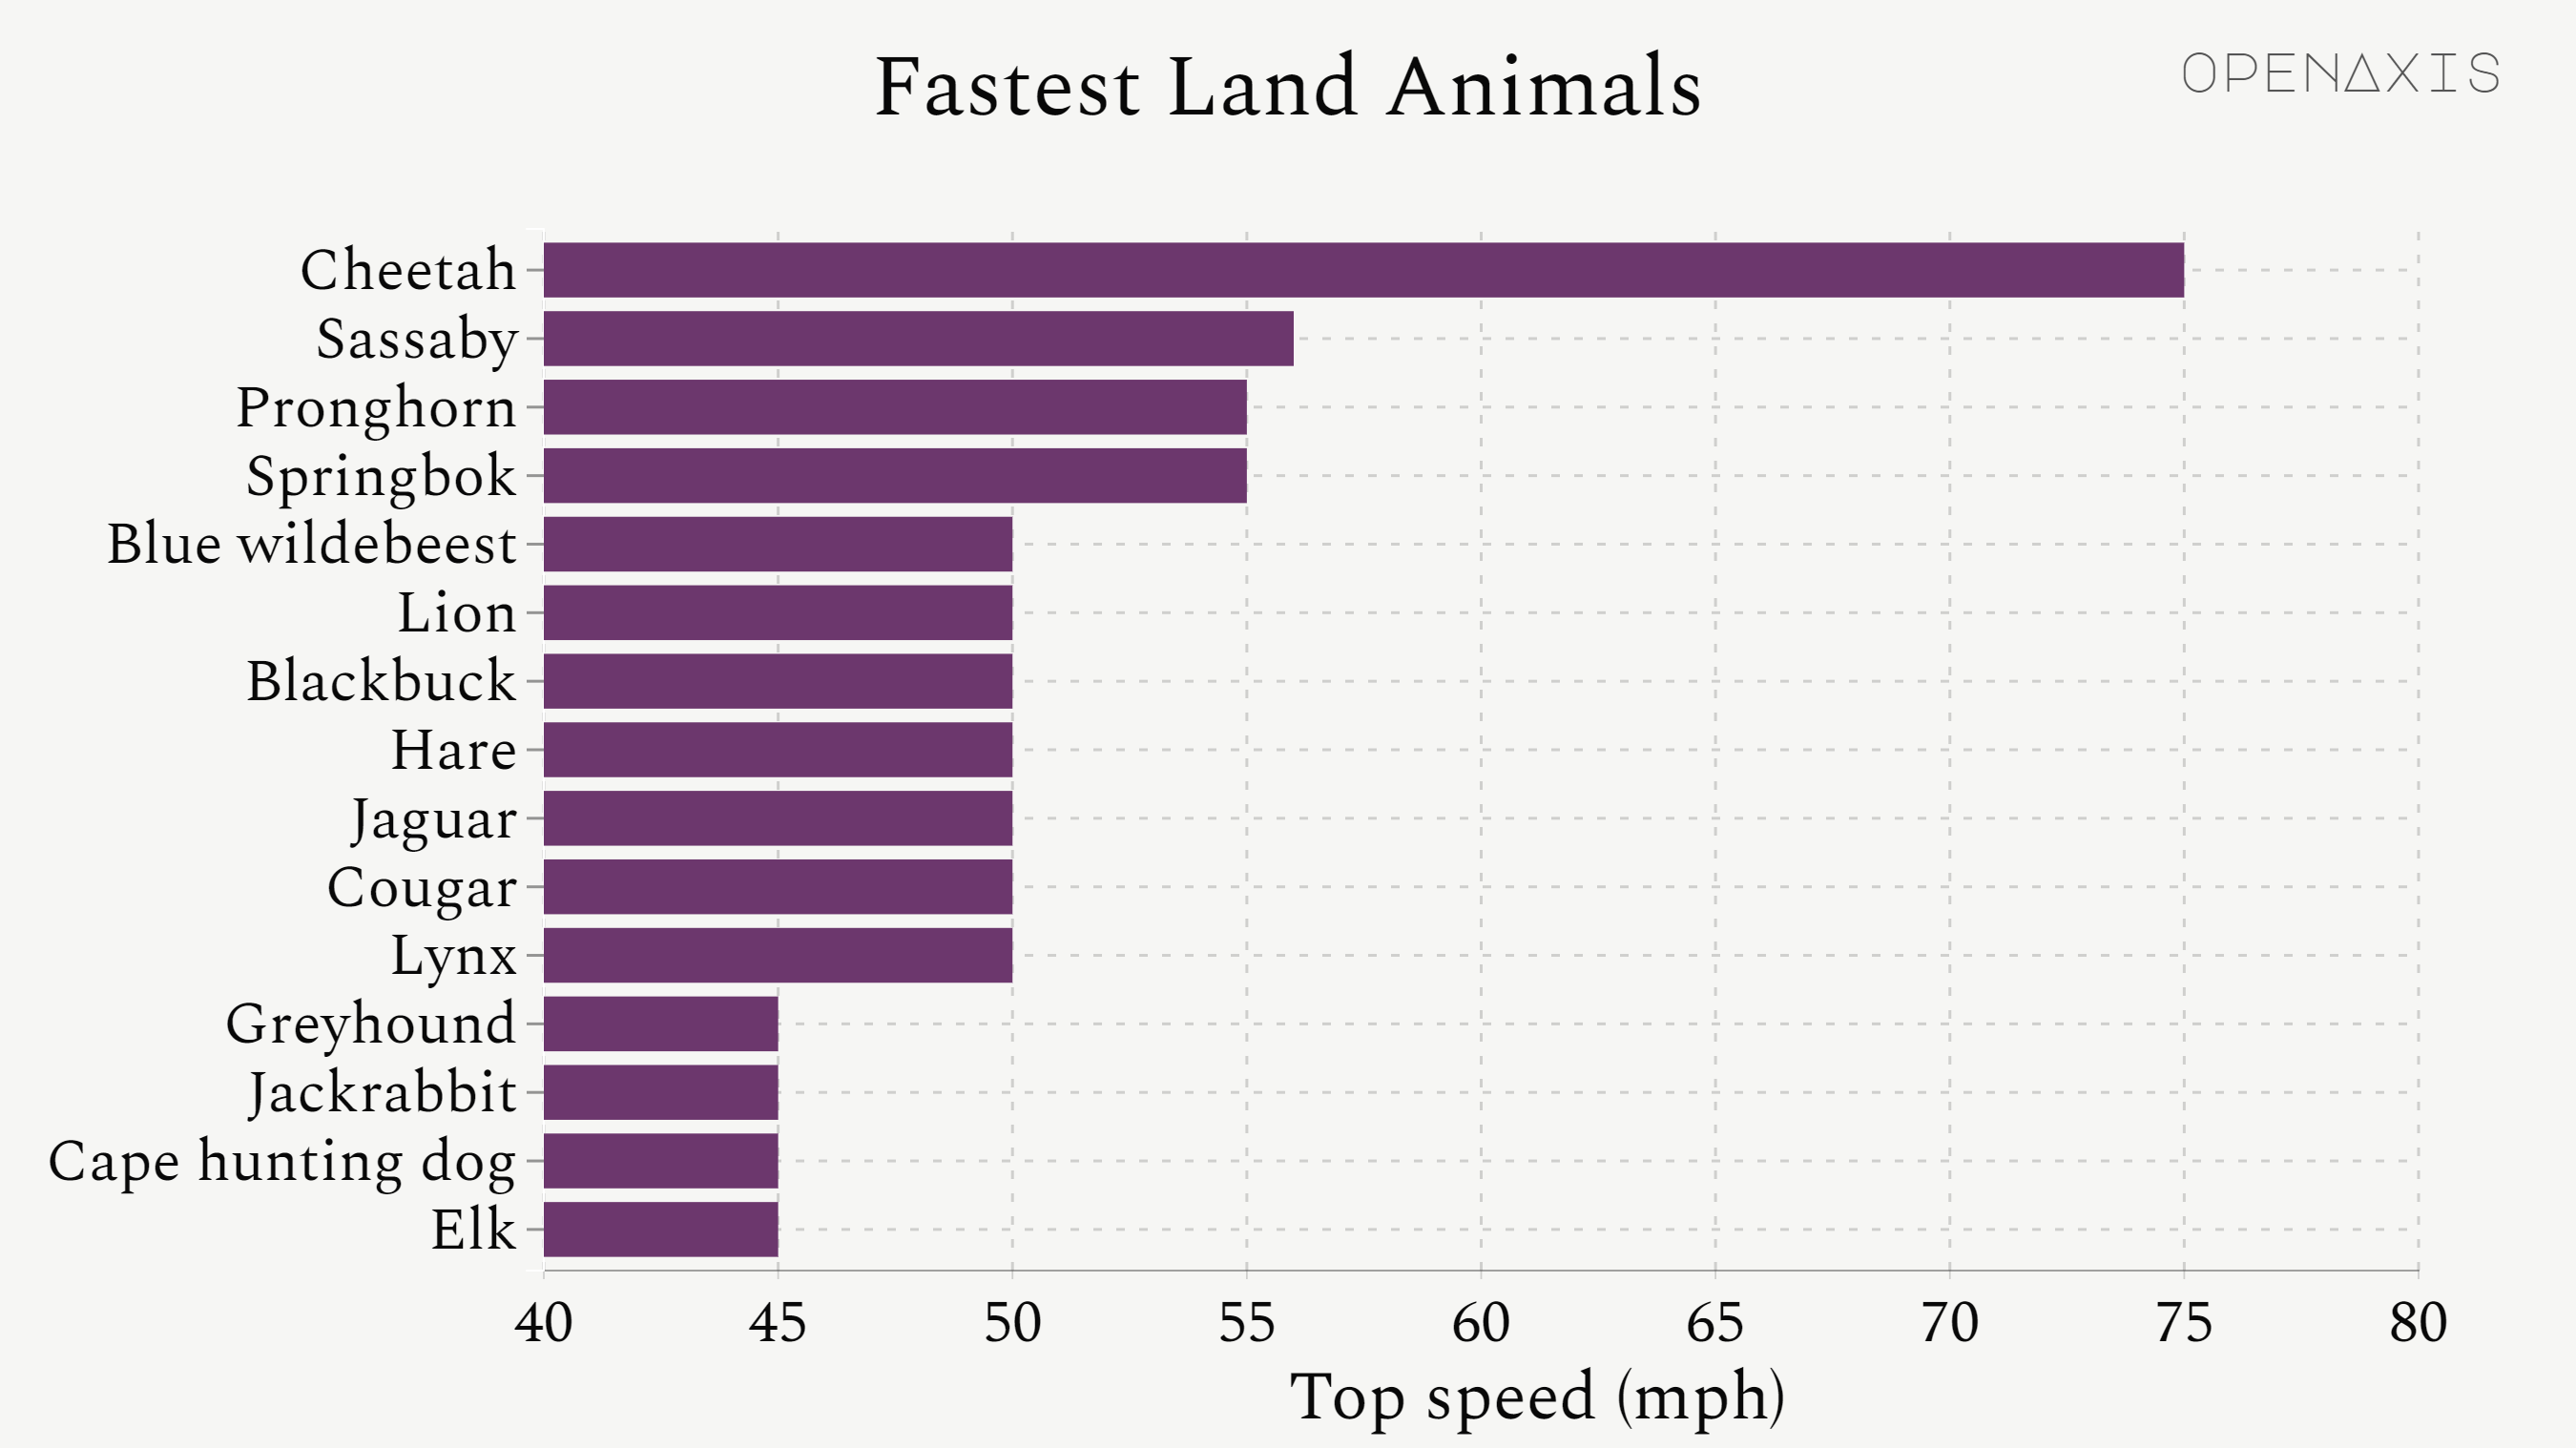 <p>A look at some of the fastest land animals in the world, with the Cheetah topping the charts with a top speed of 75 miles per hour.</p><p><br /></p><p><span data-index="0" data-denotation-char data-id="0" data-value="&lt;a href=&quot;/search?q=%23animals&quot; target=_self&gt;#animals" data-link="/search?q=%23animals">﻿<span contenteditable="false"><span></span><a href="/search?q=%23animals" target="_self">#animals</a></span>﻿</span> <span data-index="0" data-denotation-char data-id="0" data-value="&lt;a href=&quot;/search?q=%23speed&quot; target=_self&gt;#speed" data-link="/search?q=%23speed">﻿<span contenteditable="false"><span></span><a href="/search?q=%23speed" target="_self">#speed</a></span>﻿</span> </p><p><br /></p><p>Source: <a href="/data/3778" target="_blank">Wikipedia, List25</a></p><p><br /></p>